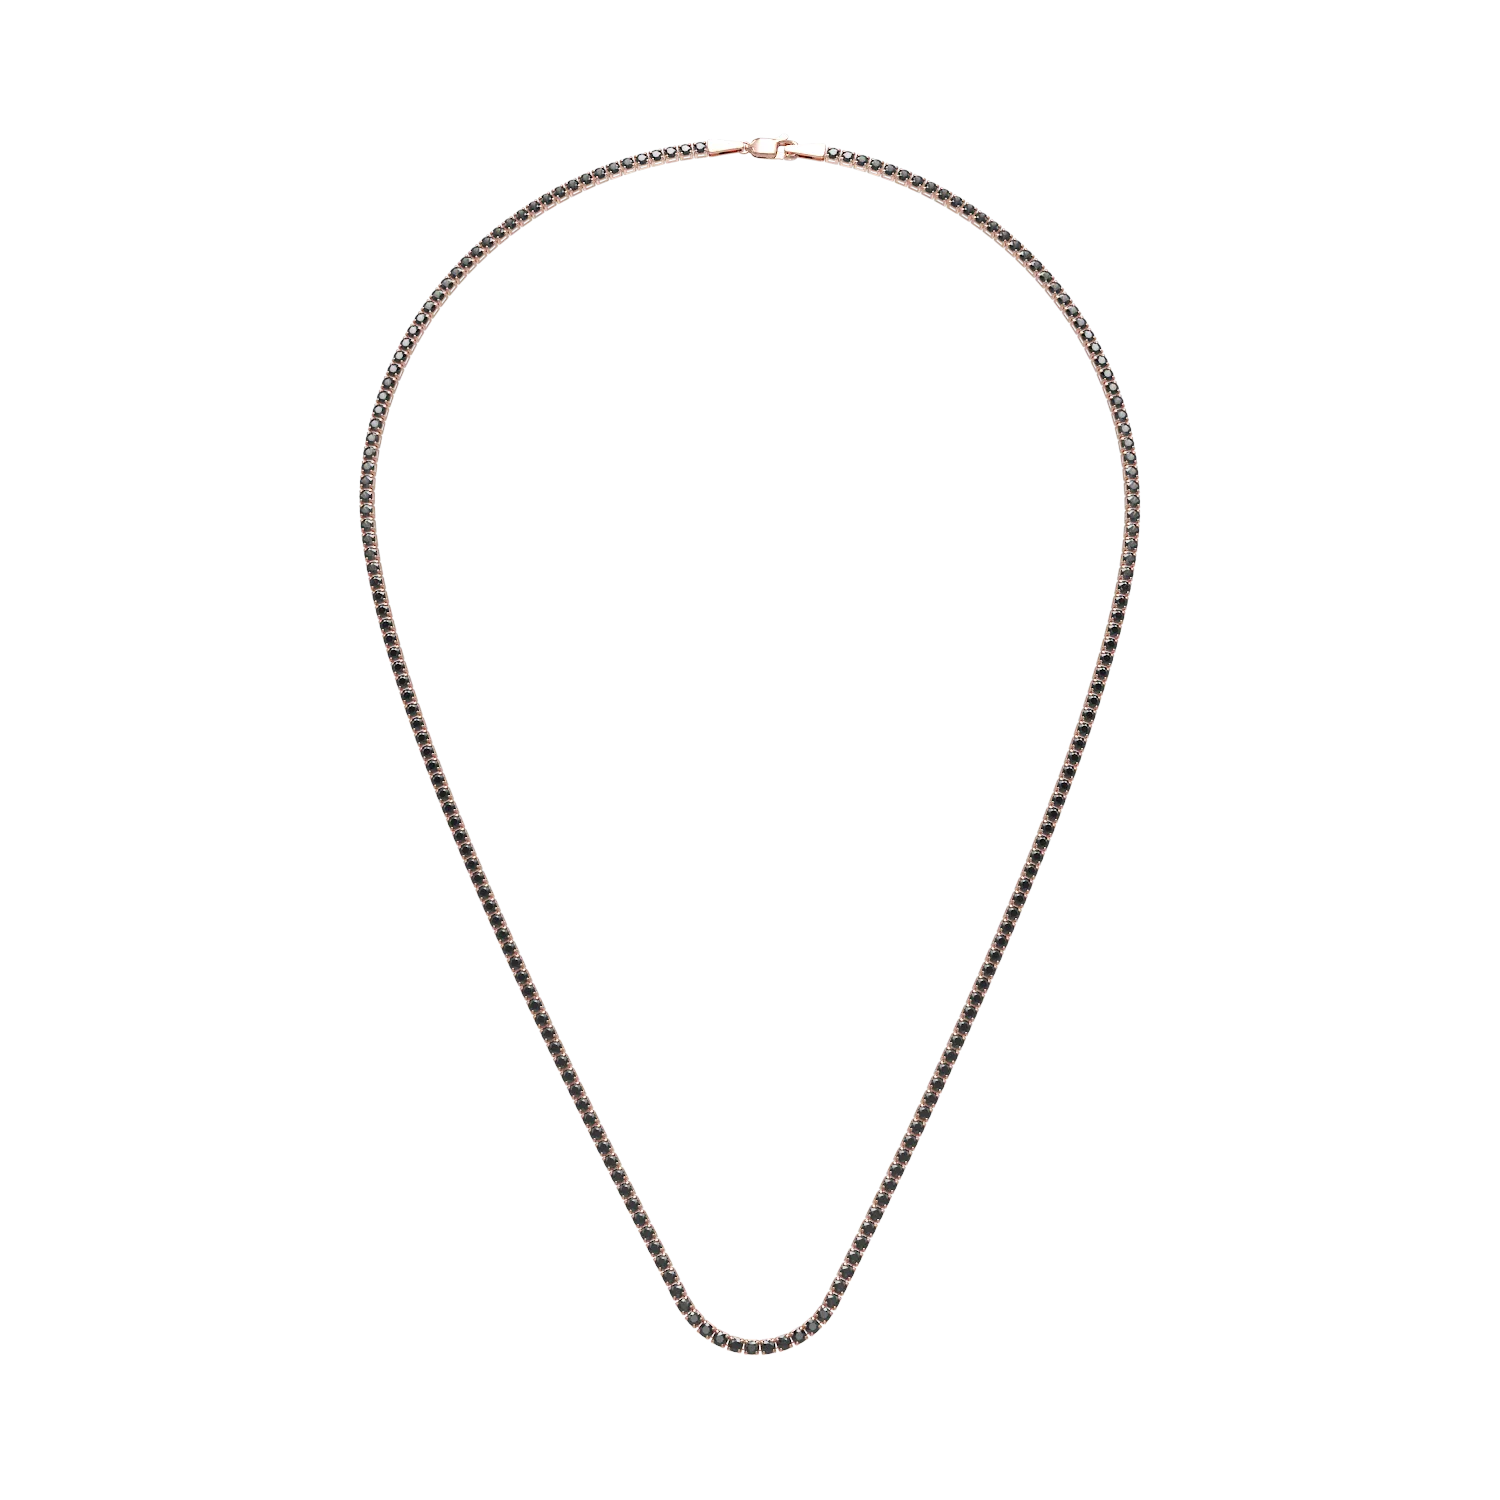 Rose gold tennis necklace